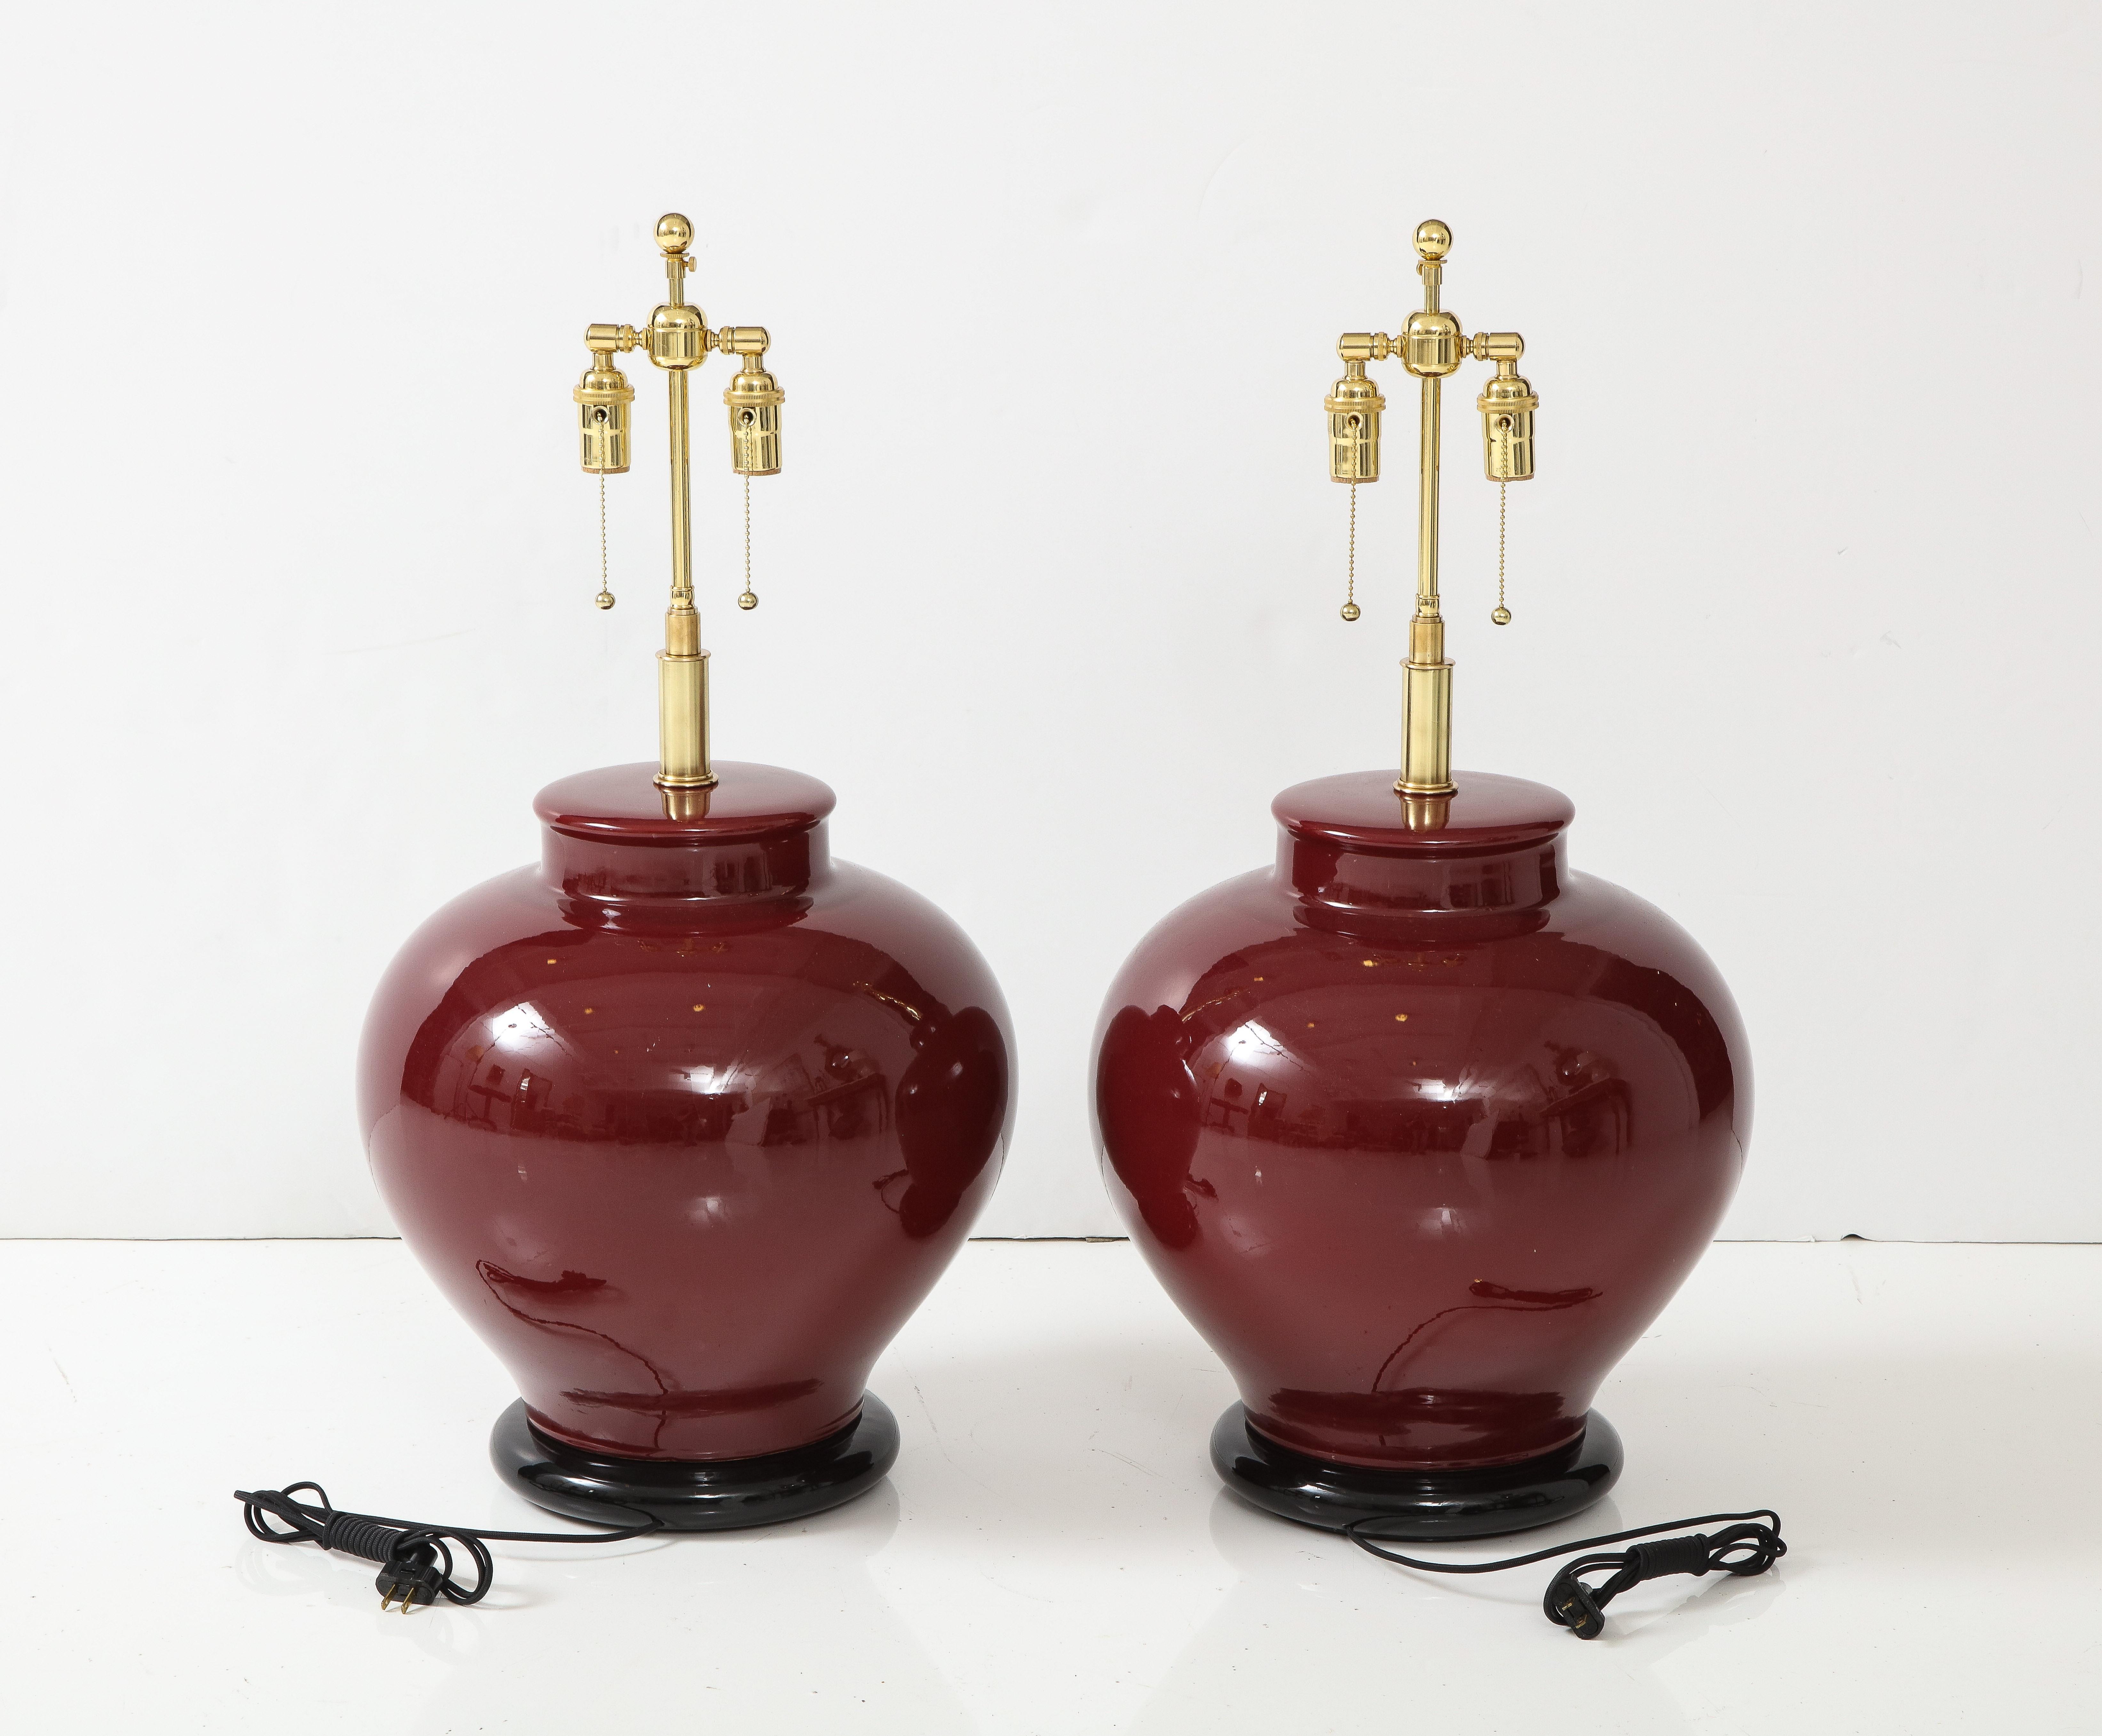 Pair of Large Ceramic Lamps with a Rich Burgundy Glaze Finish For Sale 2